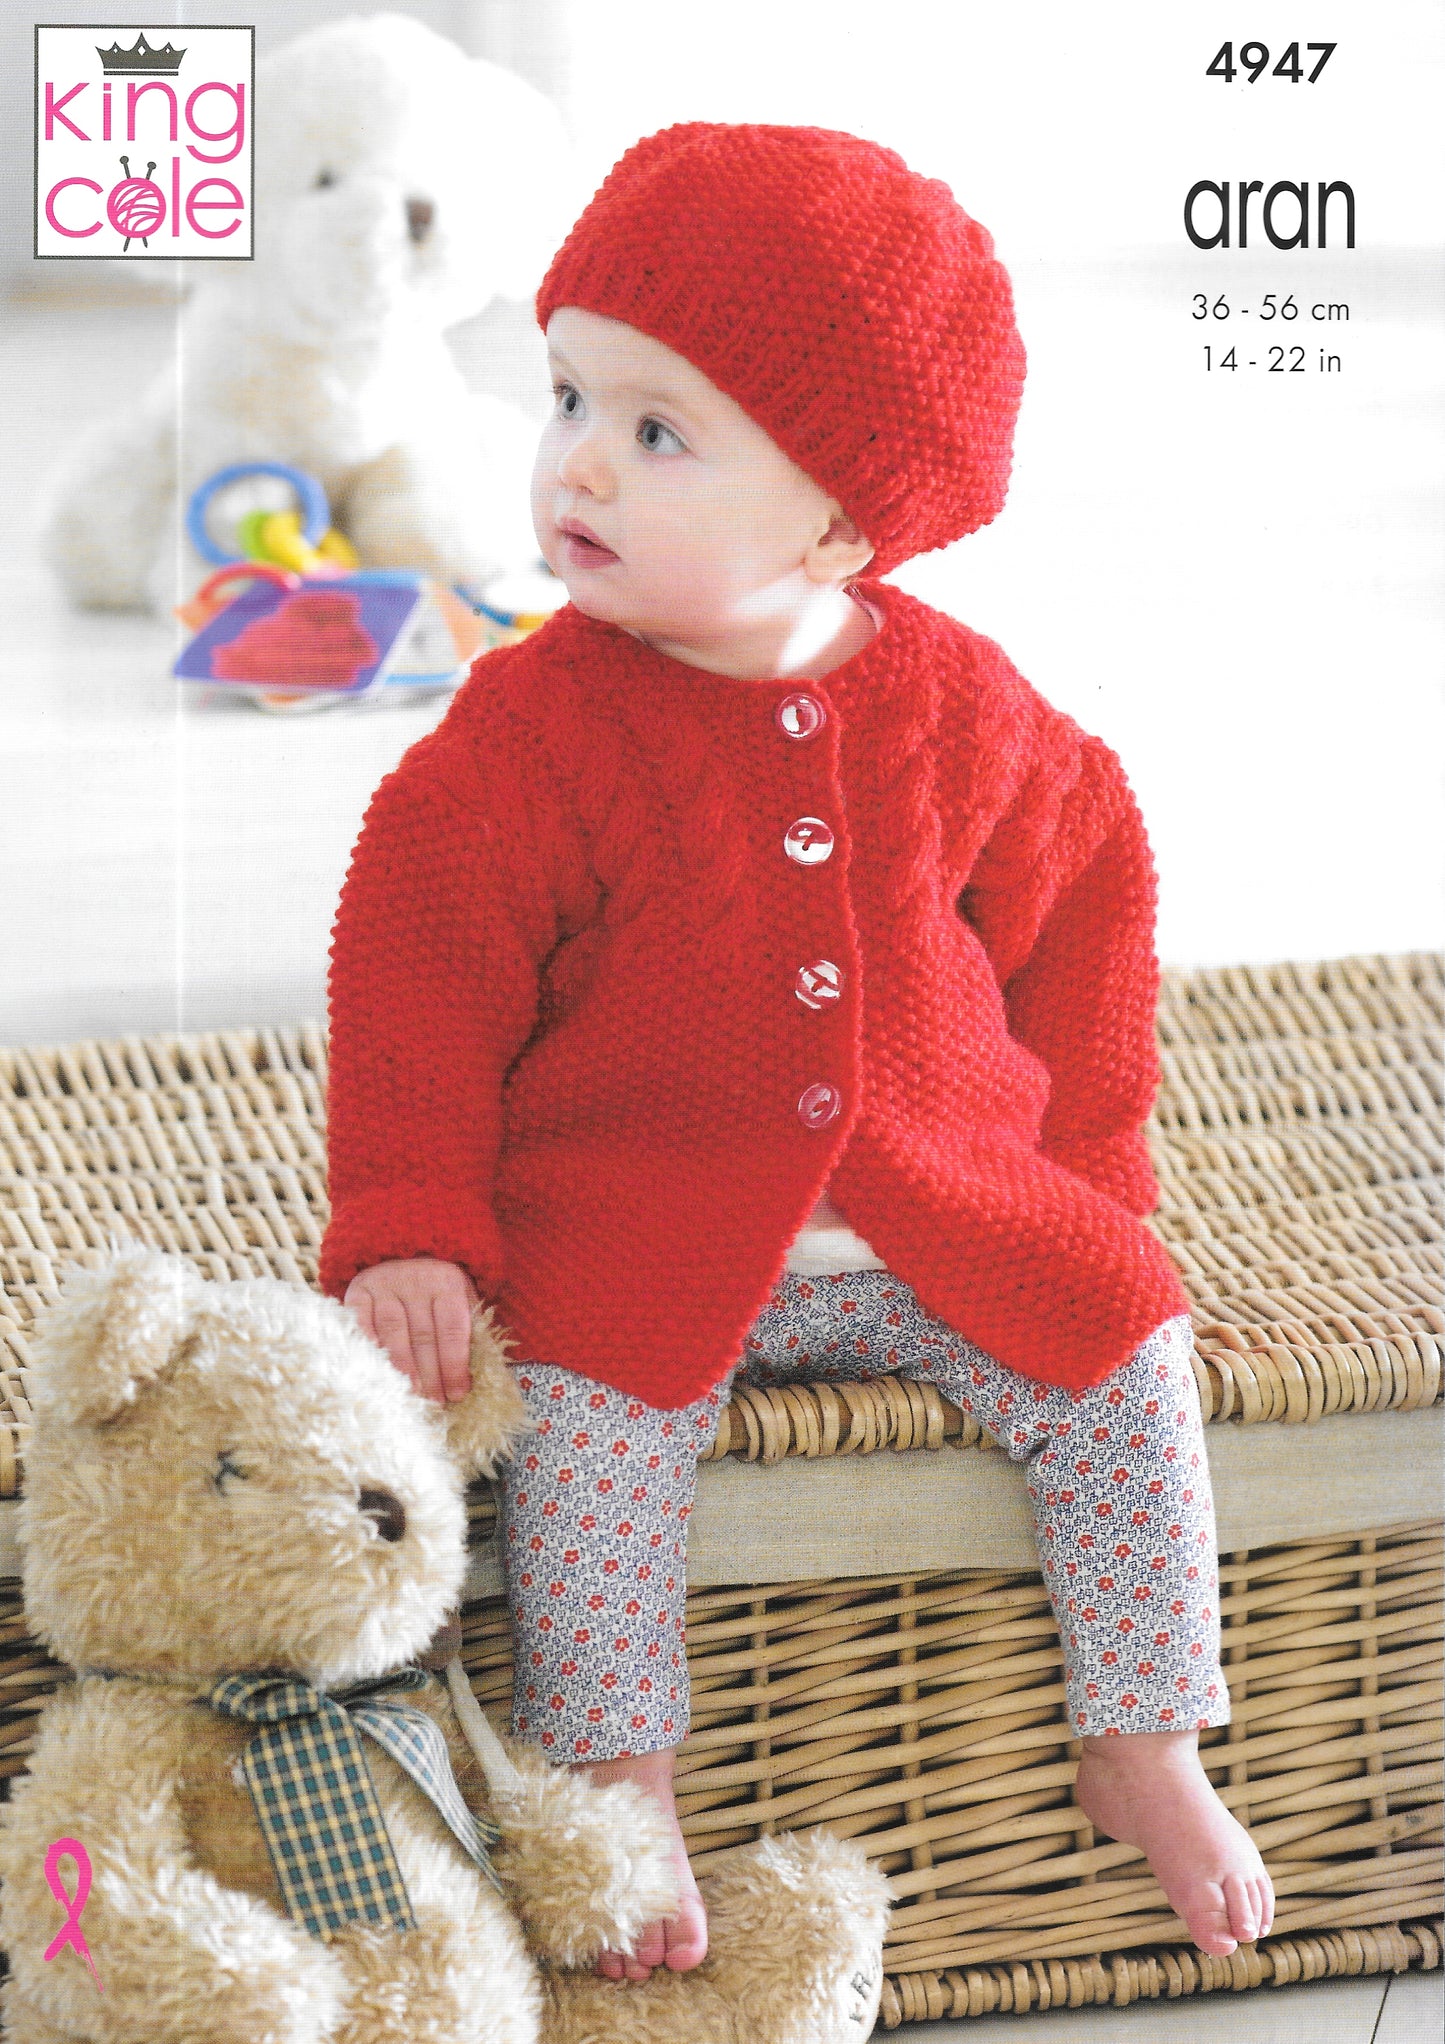 4947 King Cole knitting pattern. Child's cable cardigans. Aran